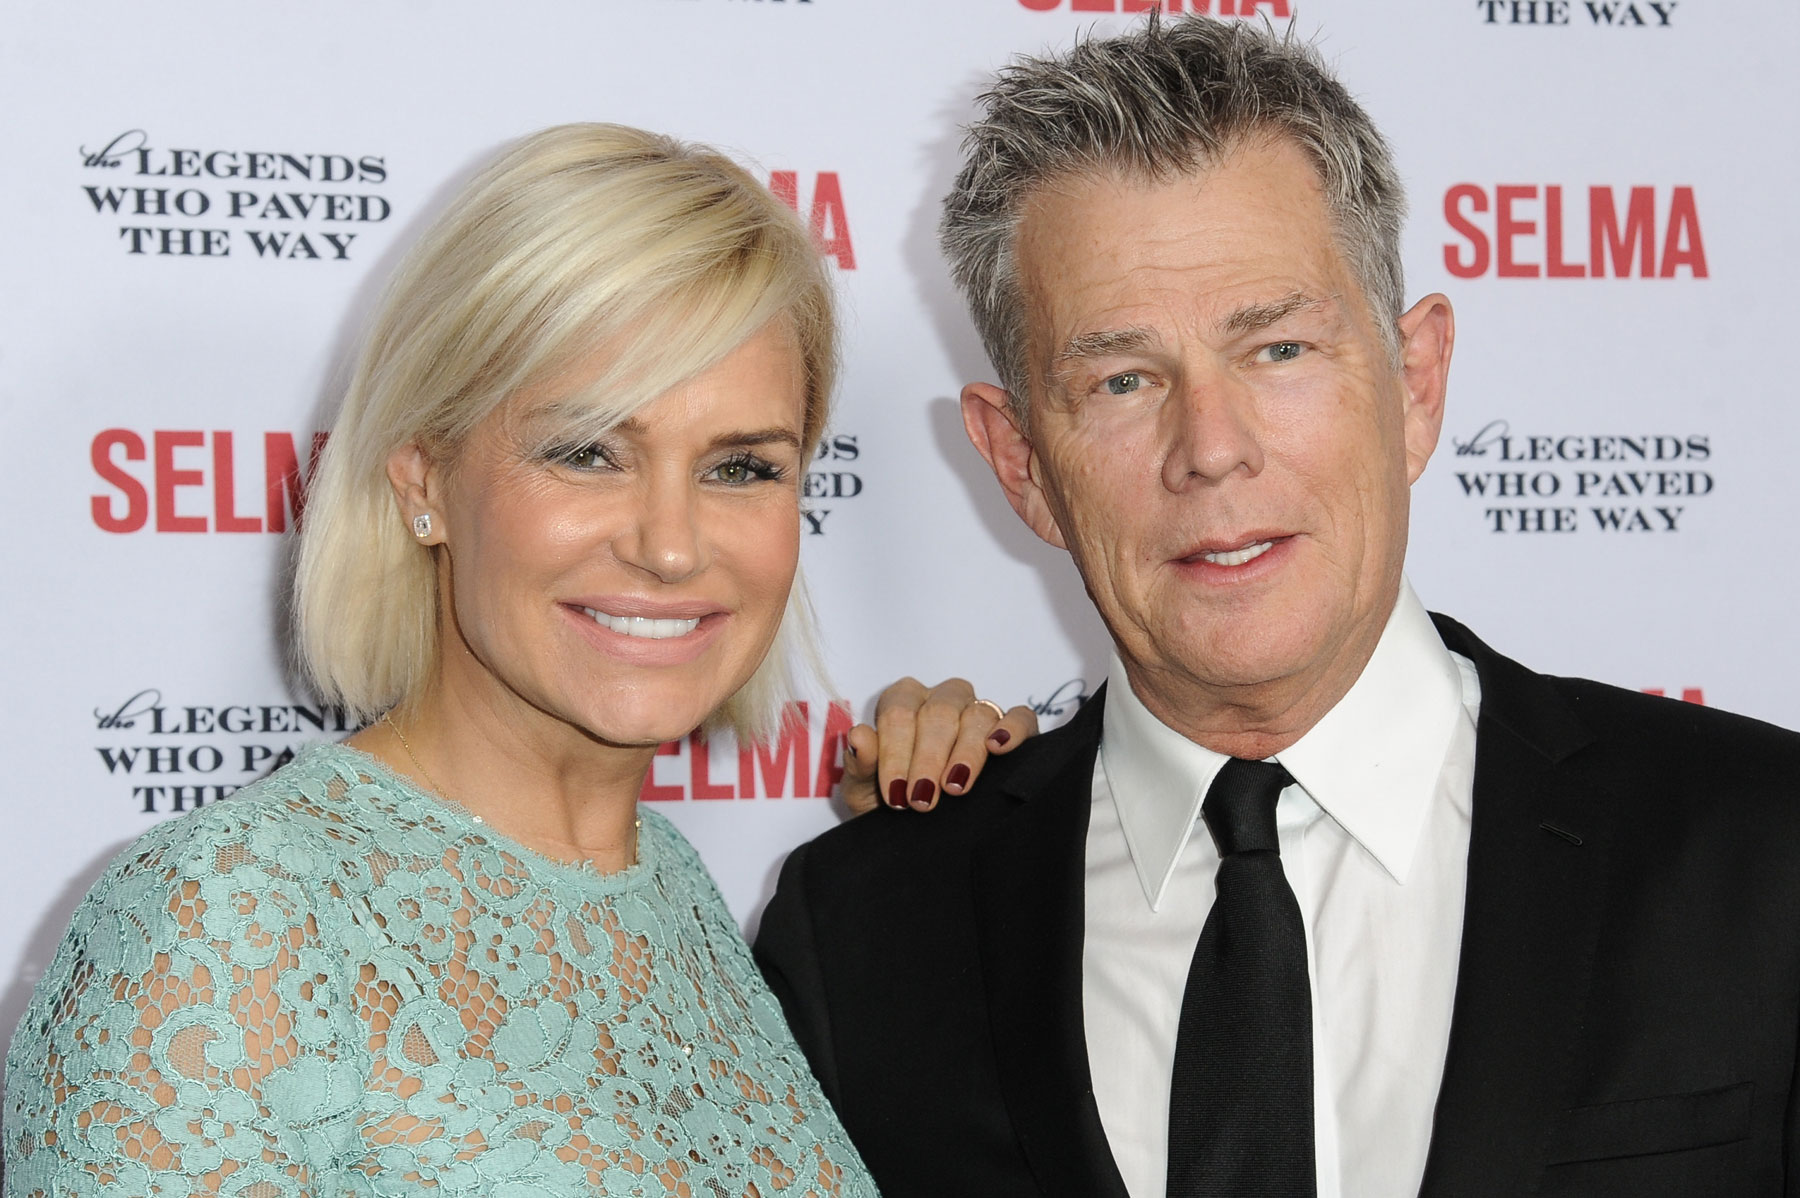 Yolanda Foster, shown with husband David Foster, says that her fight with Lyme Disease has left her unable to read, write or even watch TV. (Photo by Richard Shotwell/Invision/AP)